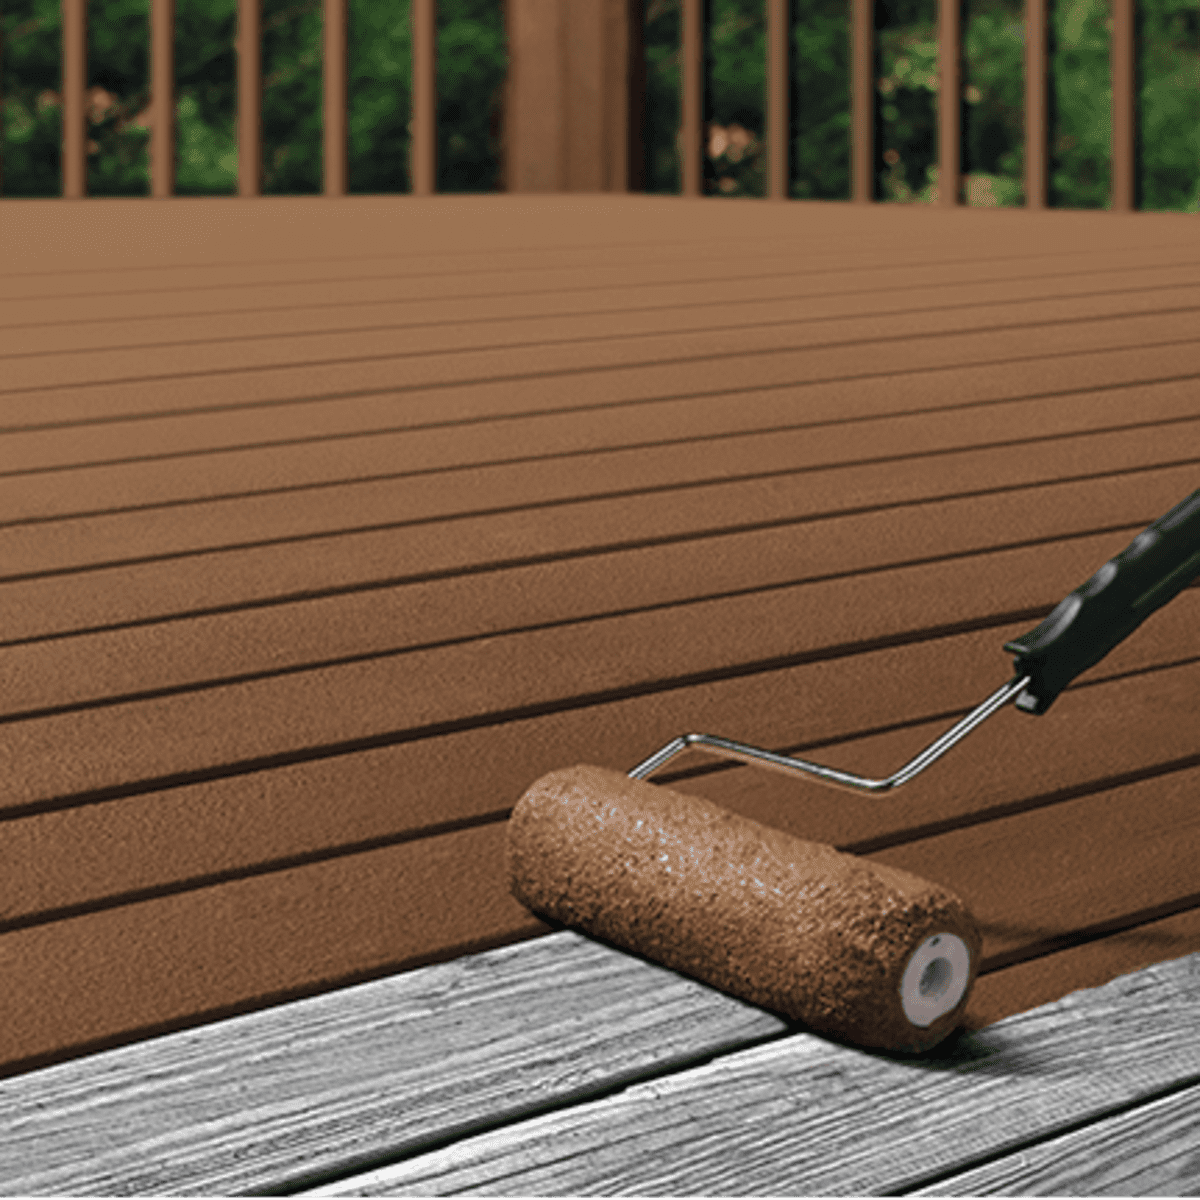 Deck Staining Near Me